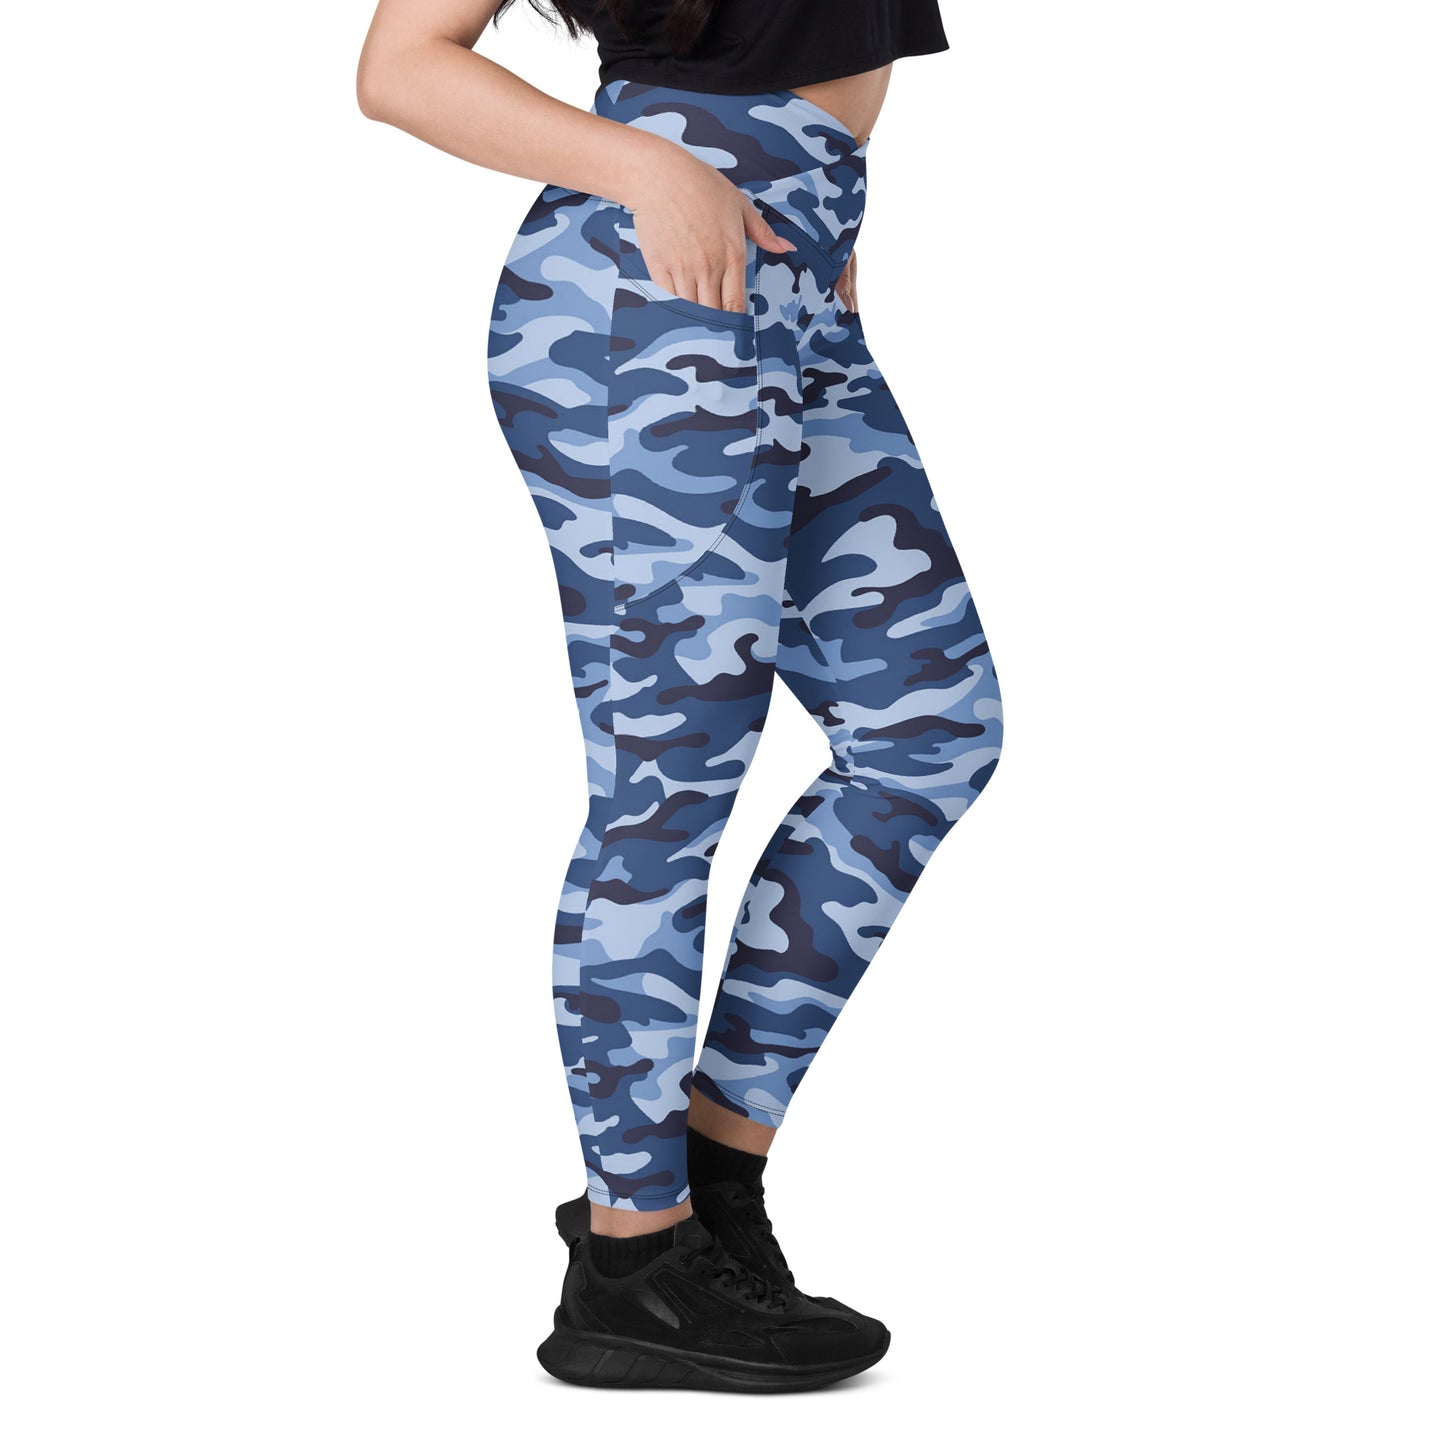 Crossover leggings with pockets - Blue Camouflage